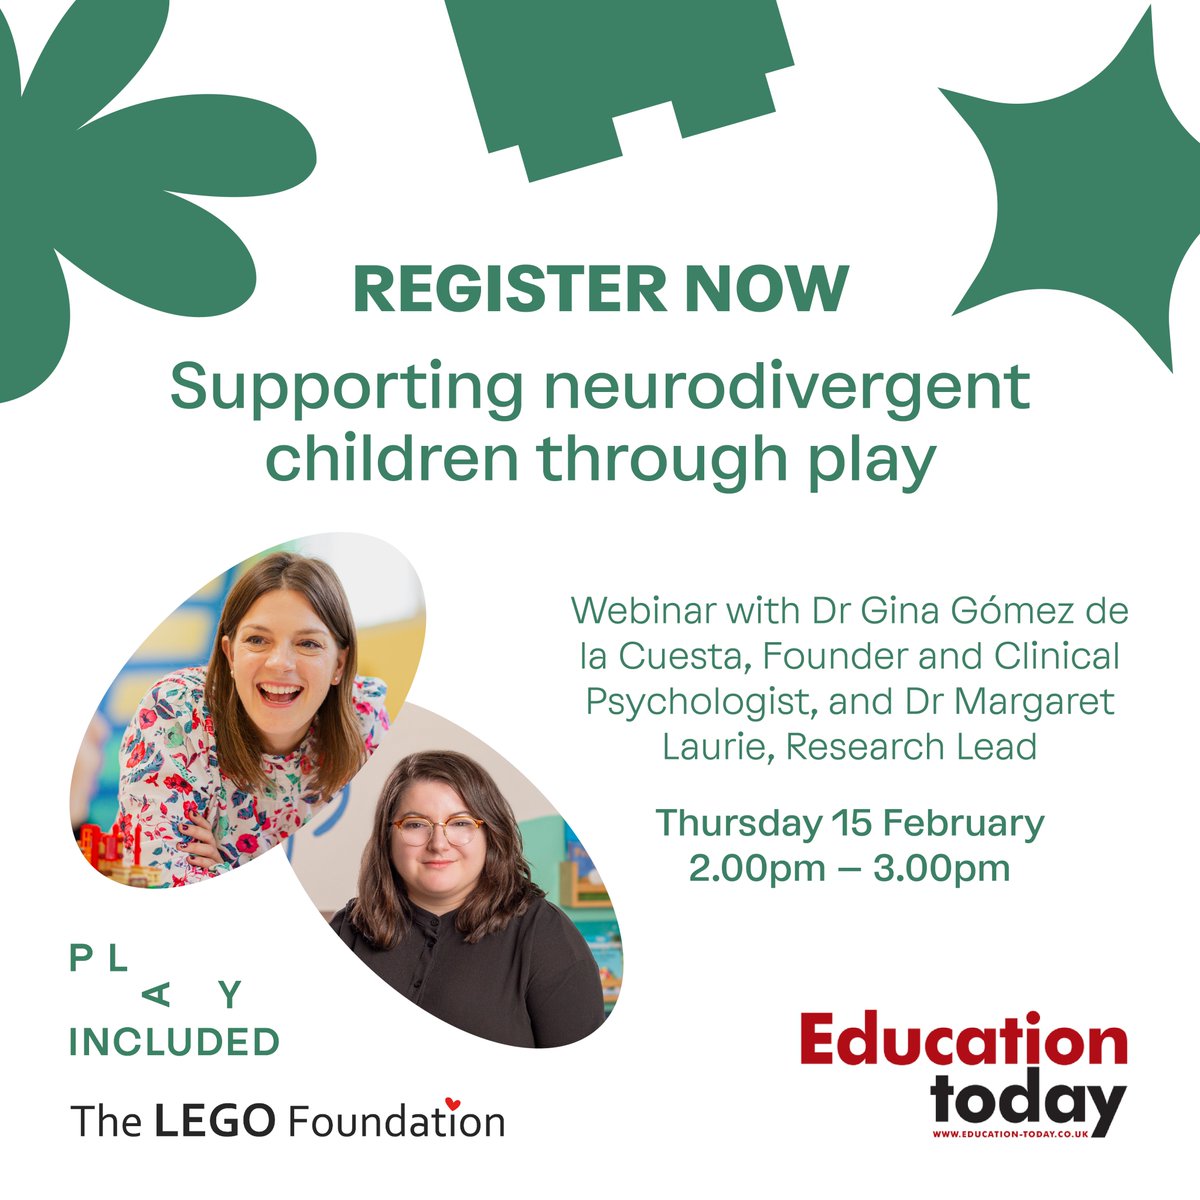 Are you a teacher who wants to support more #learning styles in the #classroom? @GinaGDLC and Dr Margaret Laurie are hosting a FREE webinar on 15 Feb at 2:00pm with @EdTodayMag. Register now to learn how to support #neurodivergent children using #play: education-today.co.uk/supporting-neu…